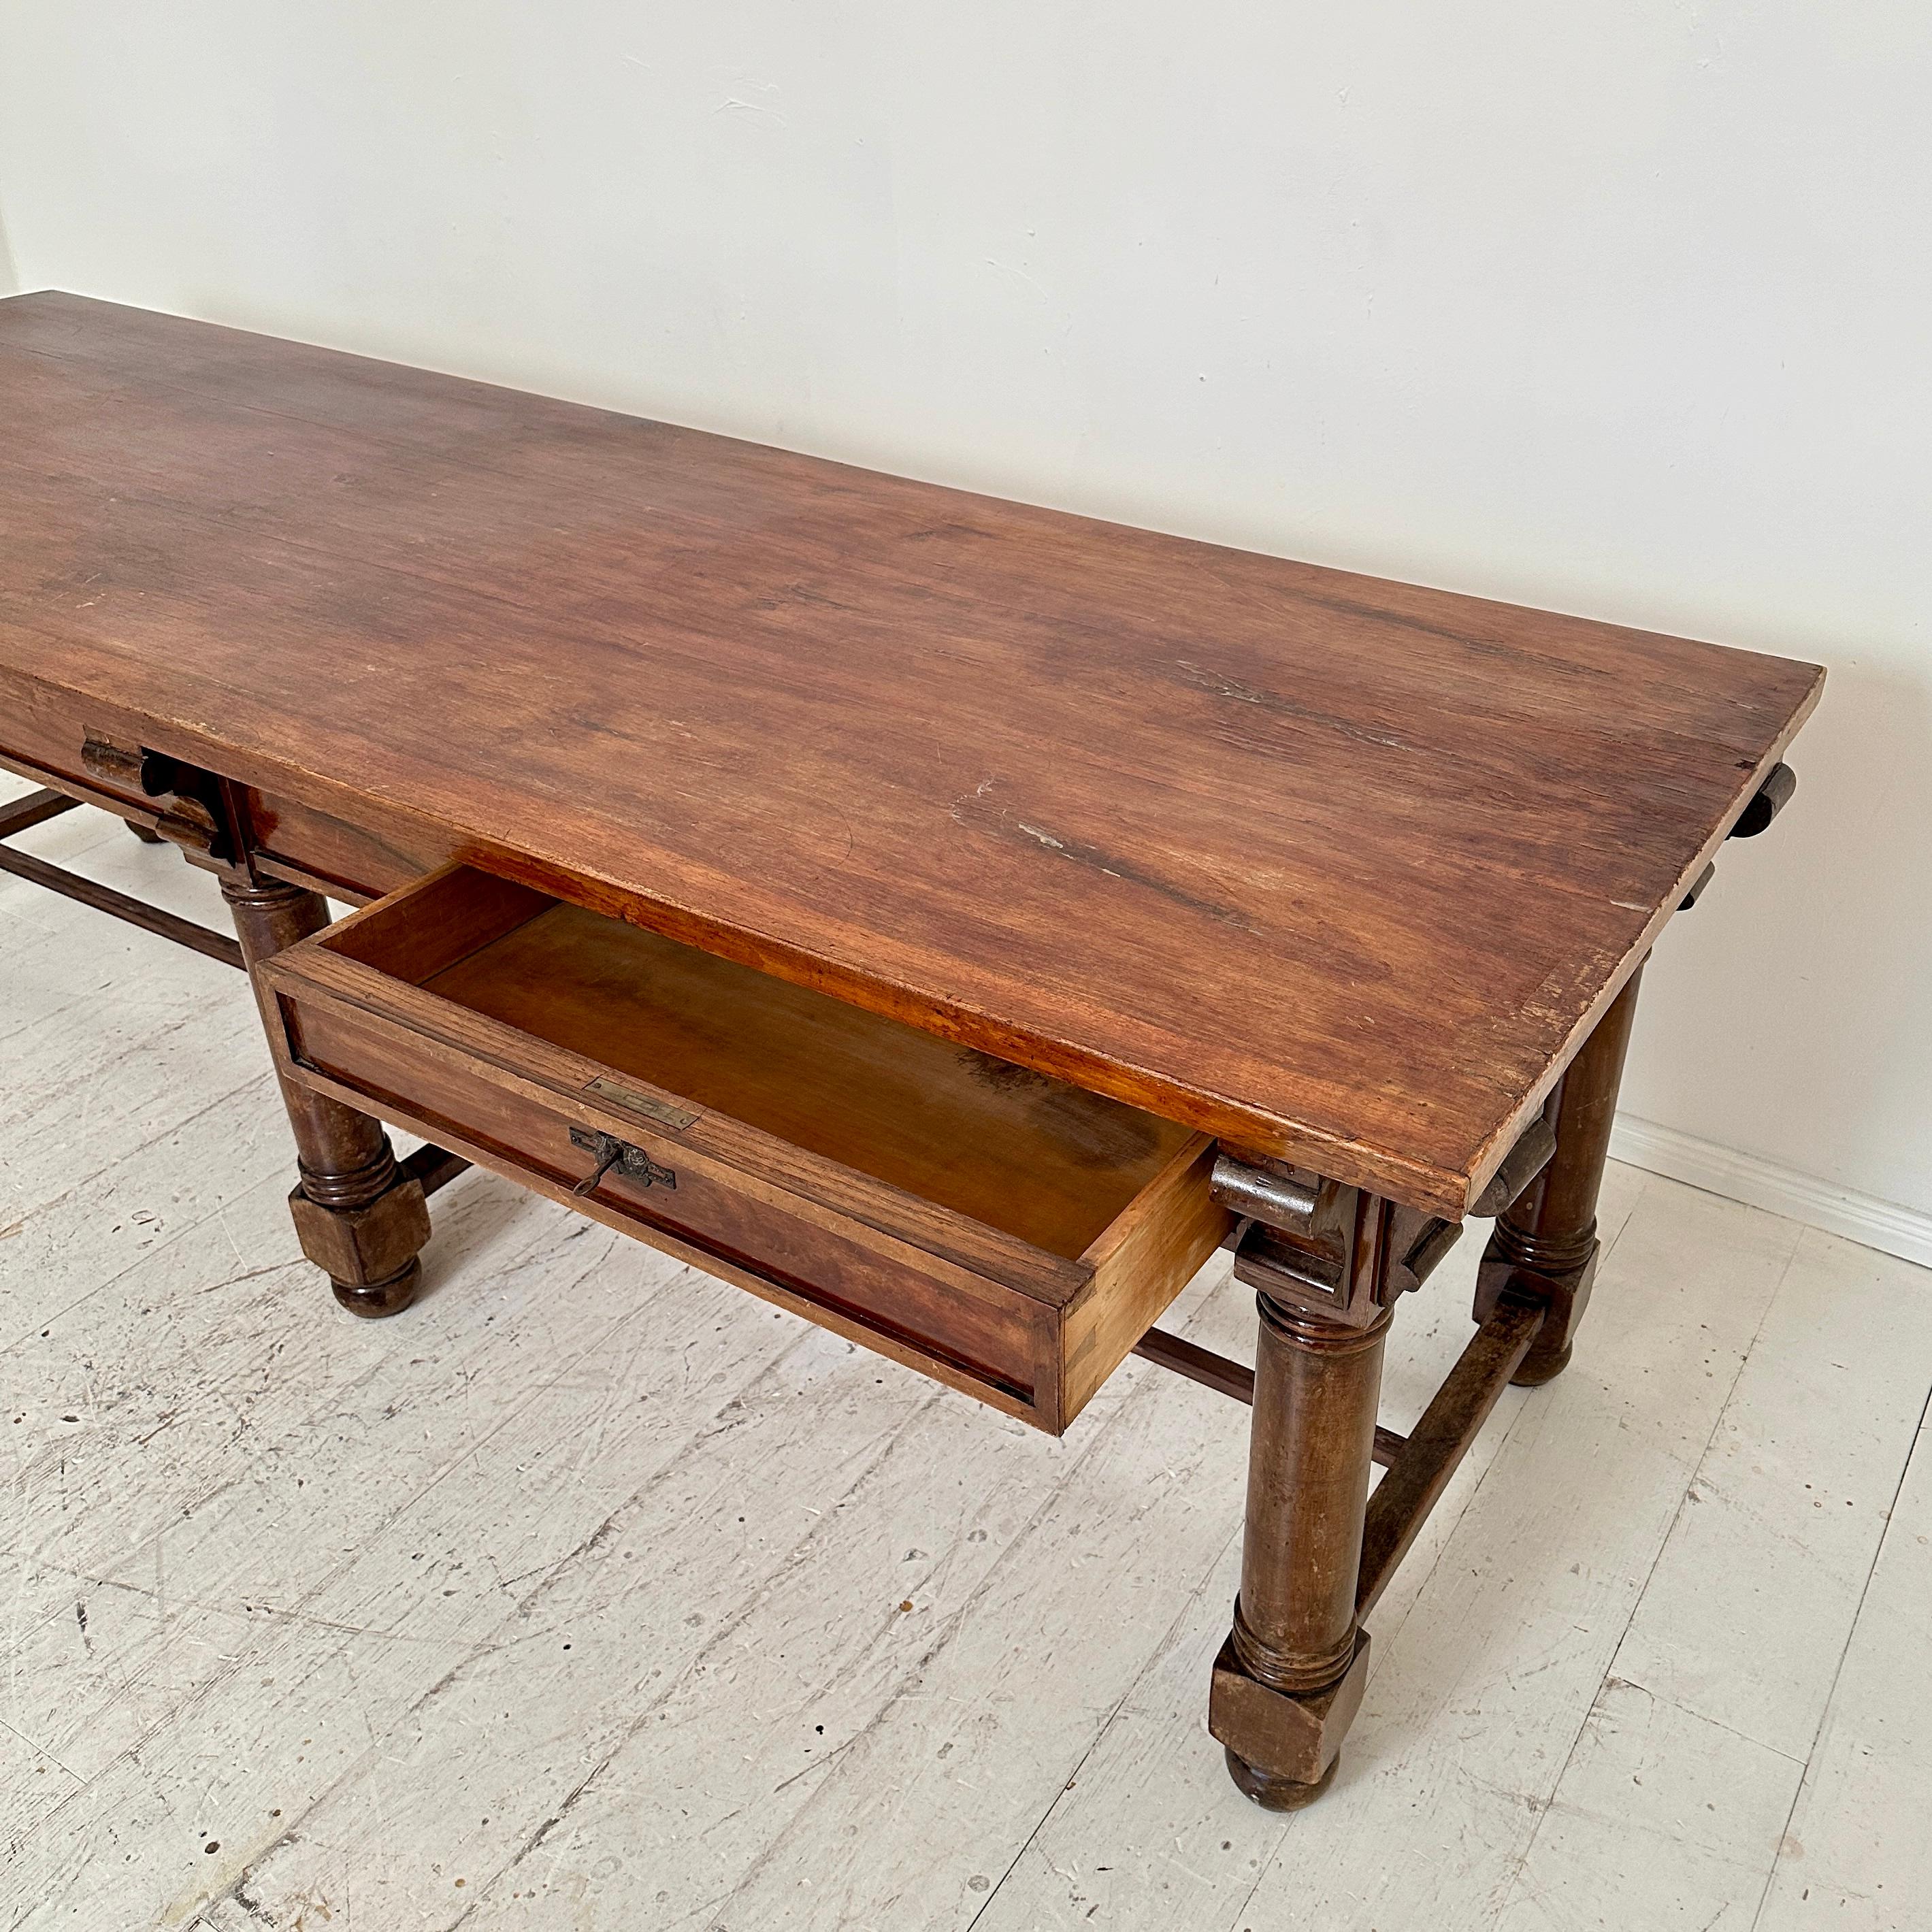 Late 19th Century Italian Large Brown Walnut Dining Table with 2 Drawers, 1880 For Sale 6